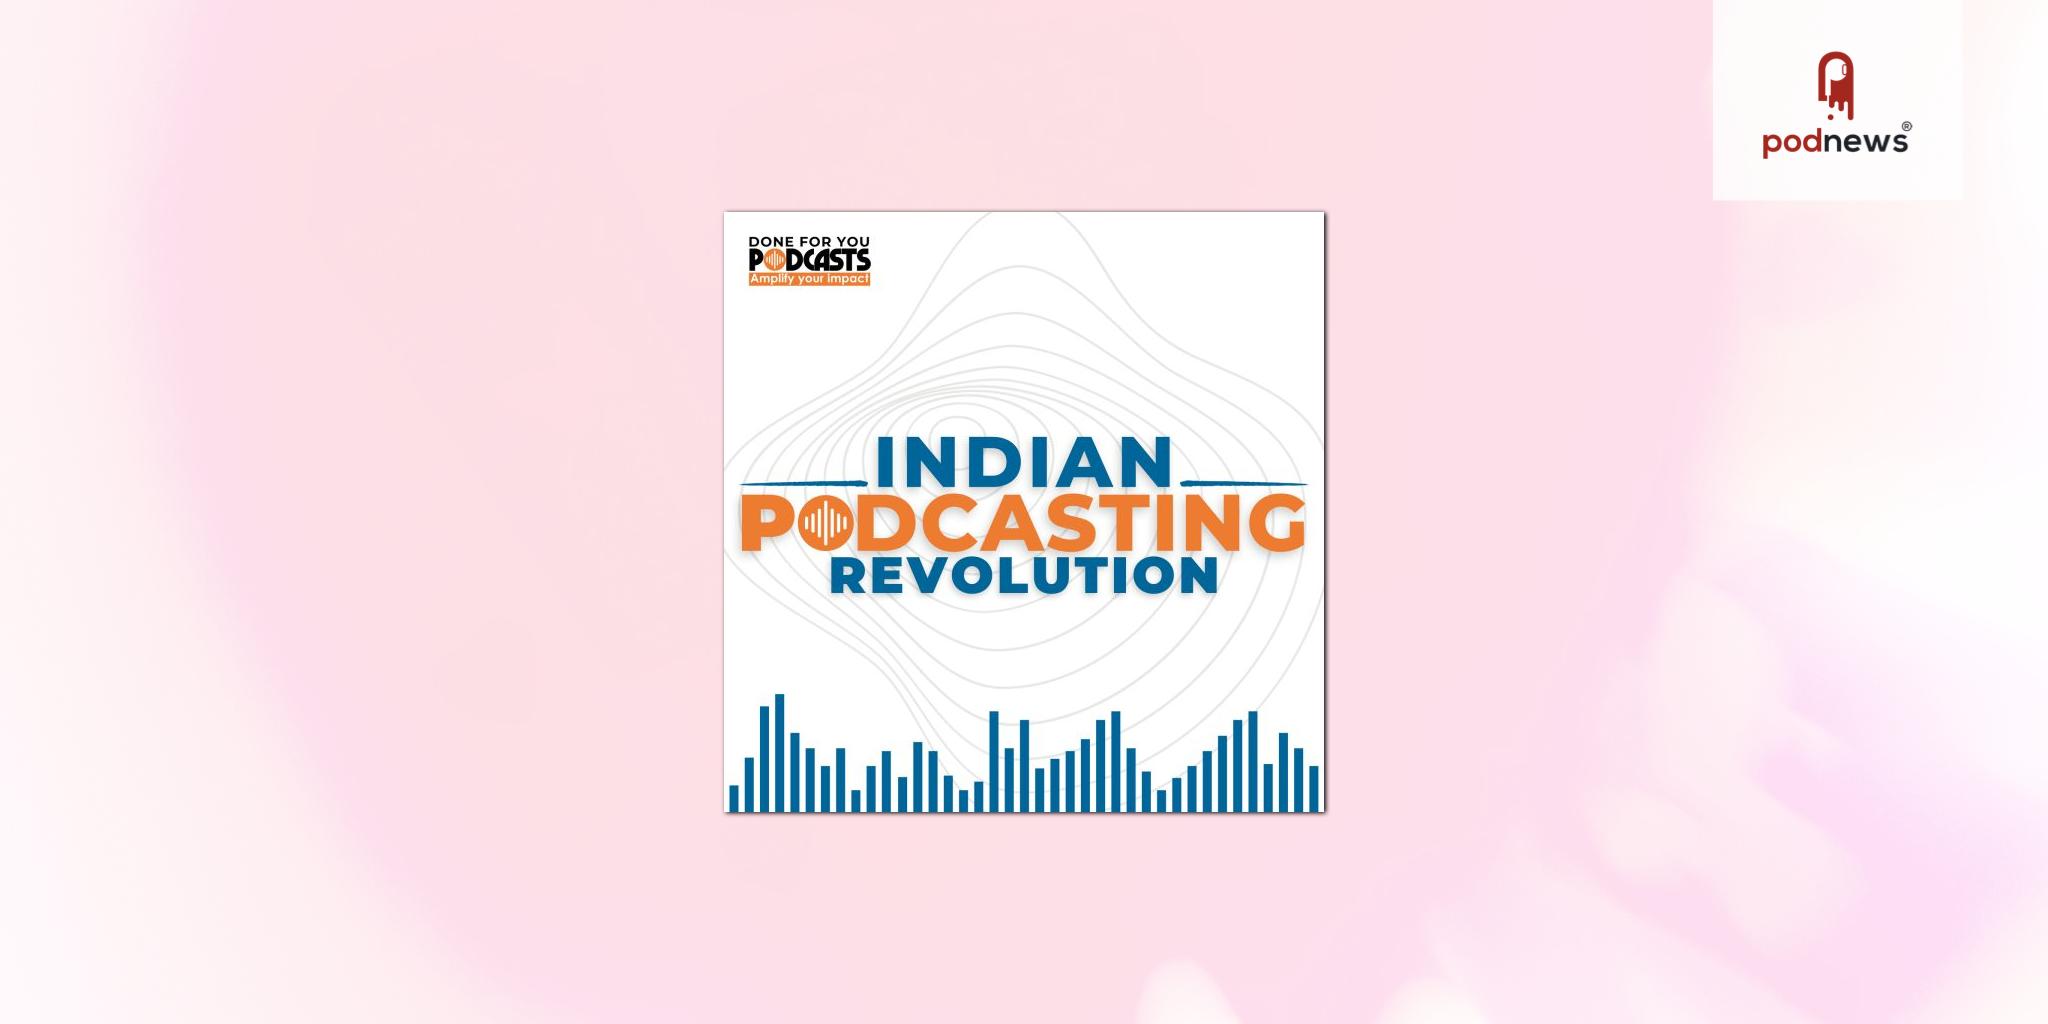 Indian Podcasting Revolution: Ground-breaking Show to Accelerate the Rise of Podcasts in India